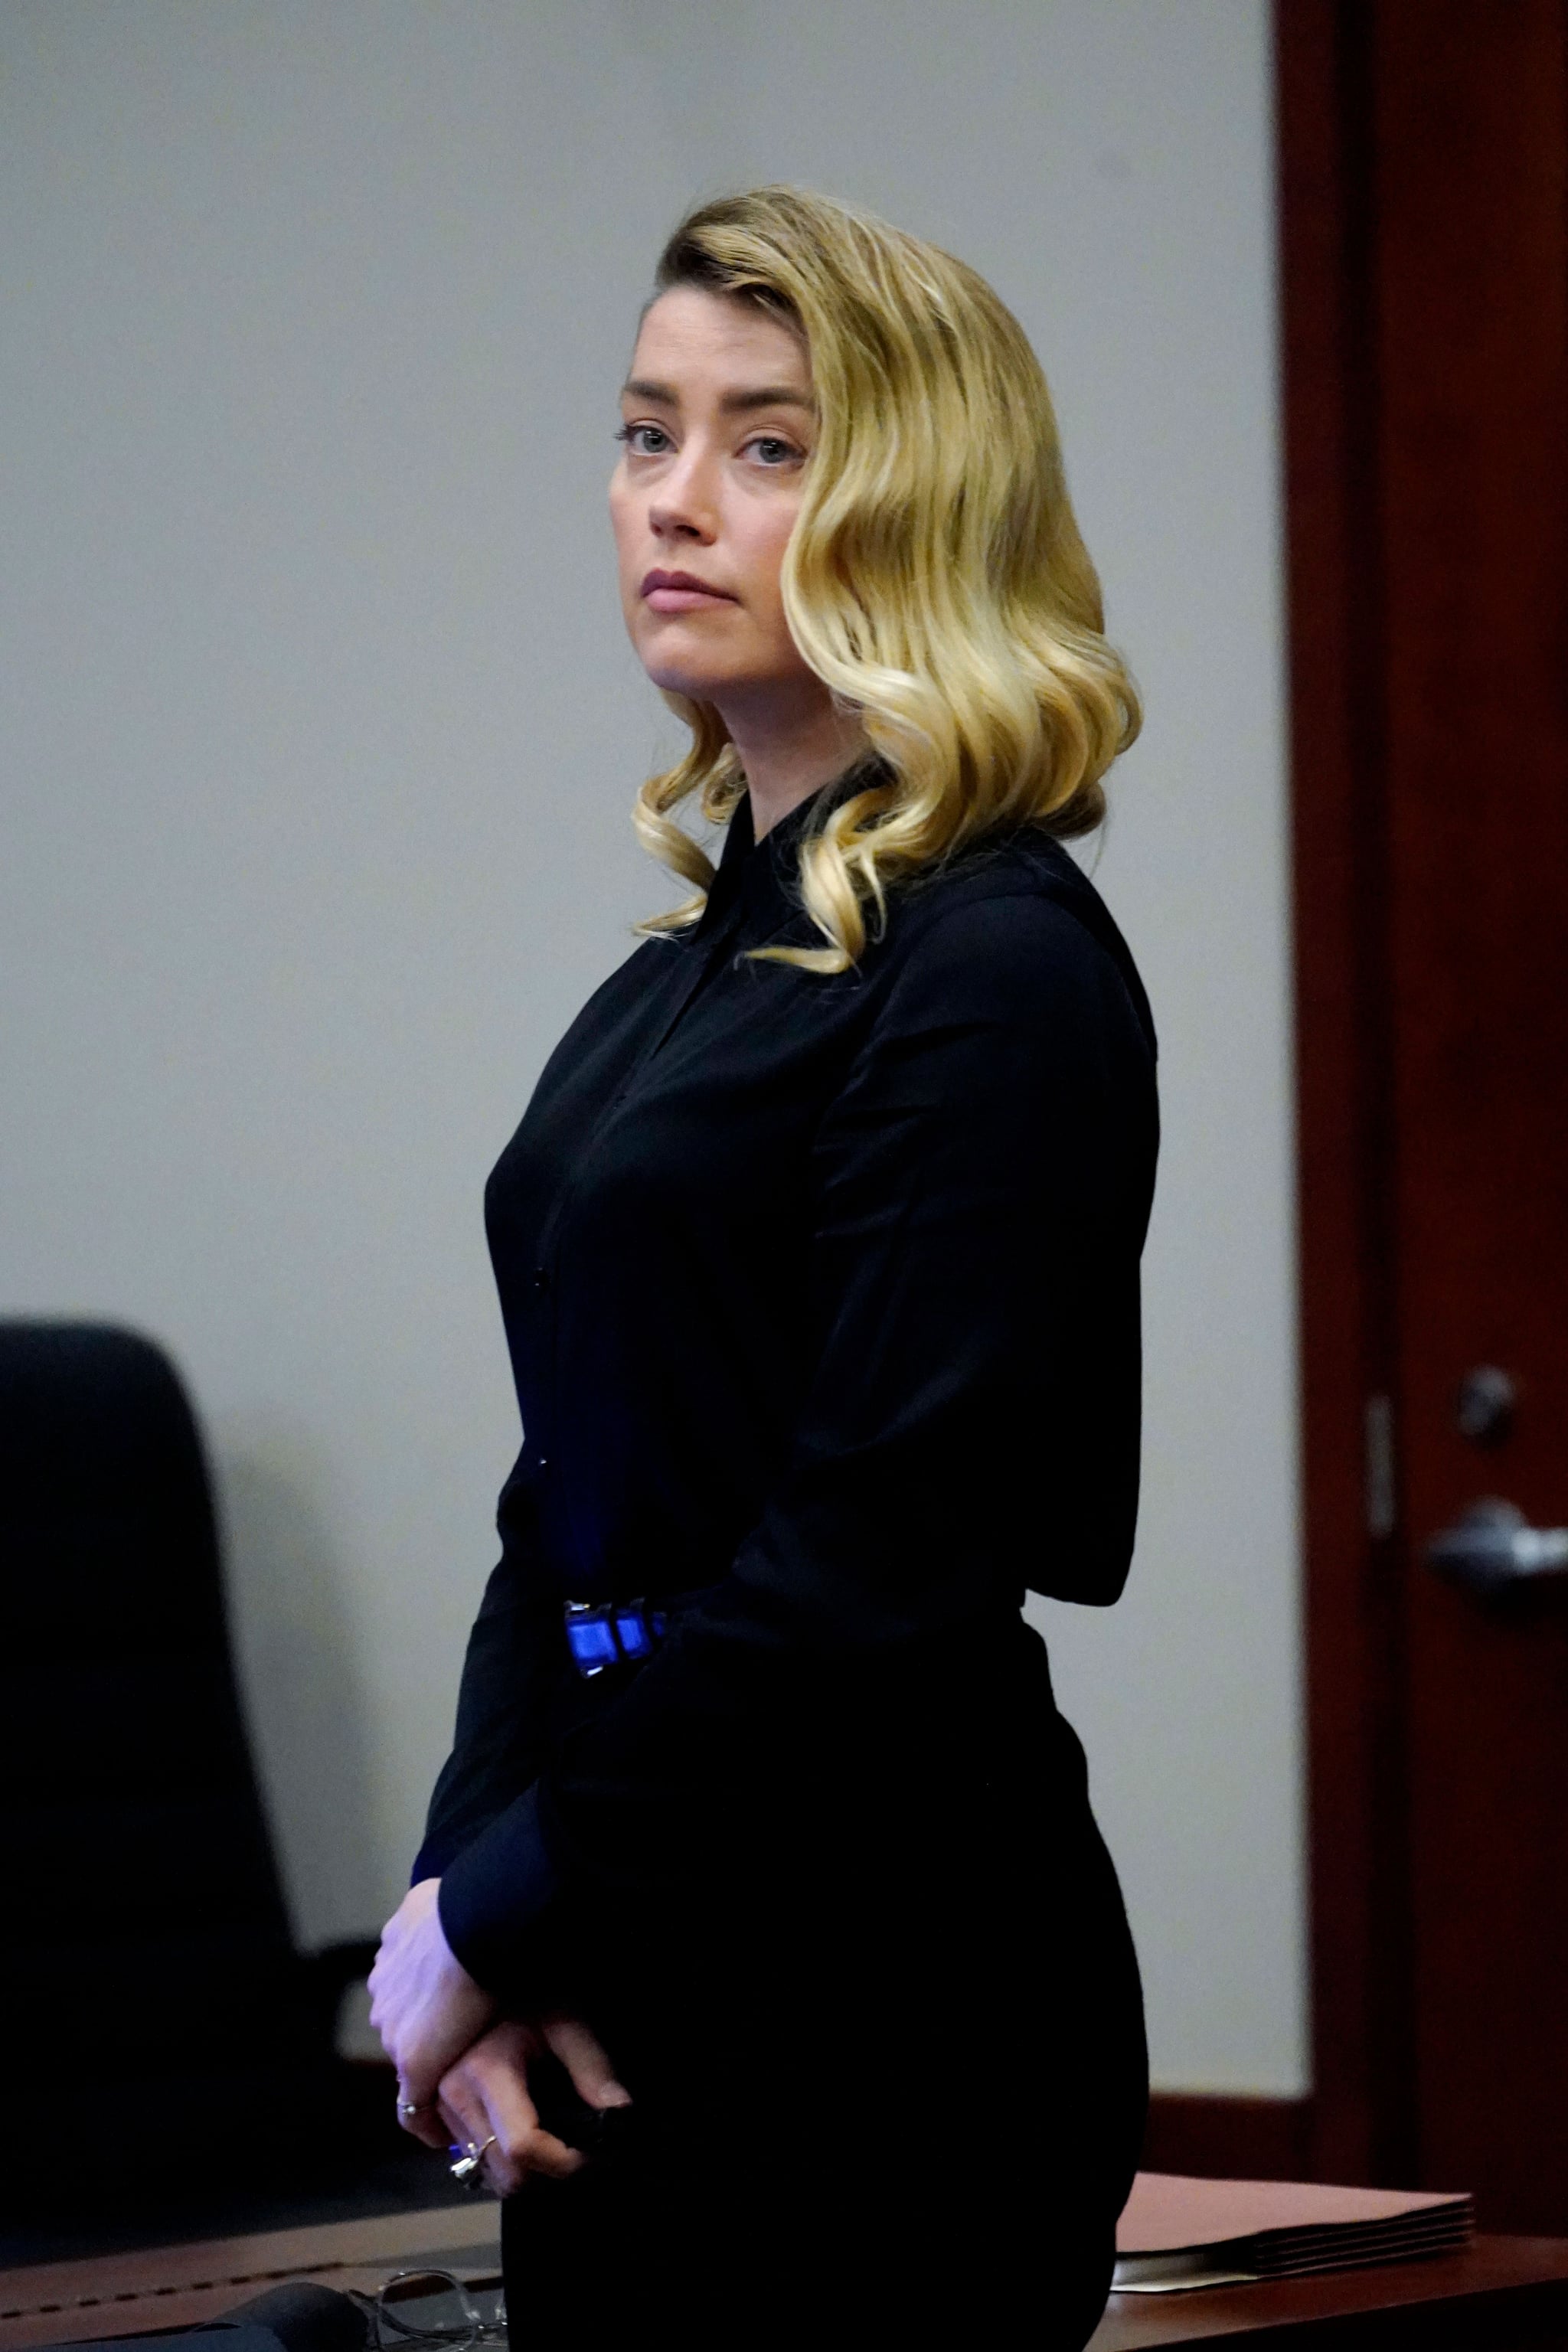 US actress Amber Heard stands and watches the jury leave as a lunch break starts at the Fairfax County Circuit Court in Fairfax, Virginia, on April 18, 2022. - US actor Johnny Depp sued his ex-wife Amber Heard for libel in Fairfax County Circuit Court after she wrote an op-ed piece in The Washington Post in 2018 referring to herself as a public figure representing domestic abuse. (Photo by Steve Helber / POOL / AFP) (Photo by STEVE HELBER/POOL/AFP via Getty Images)